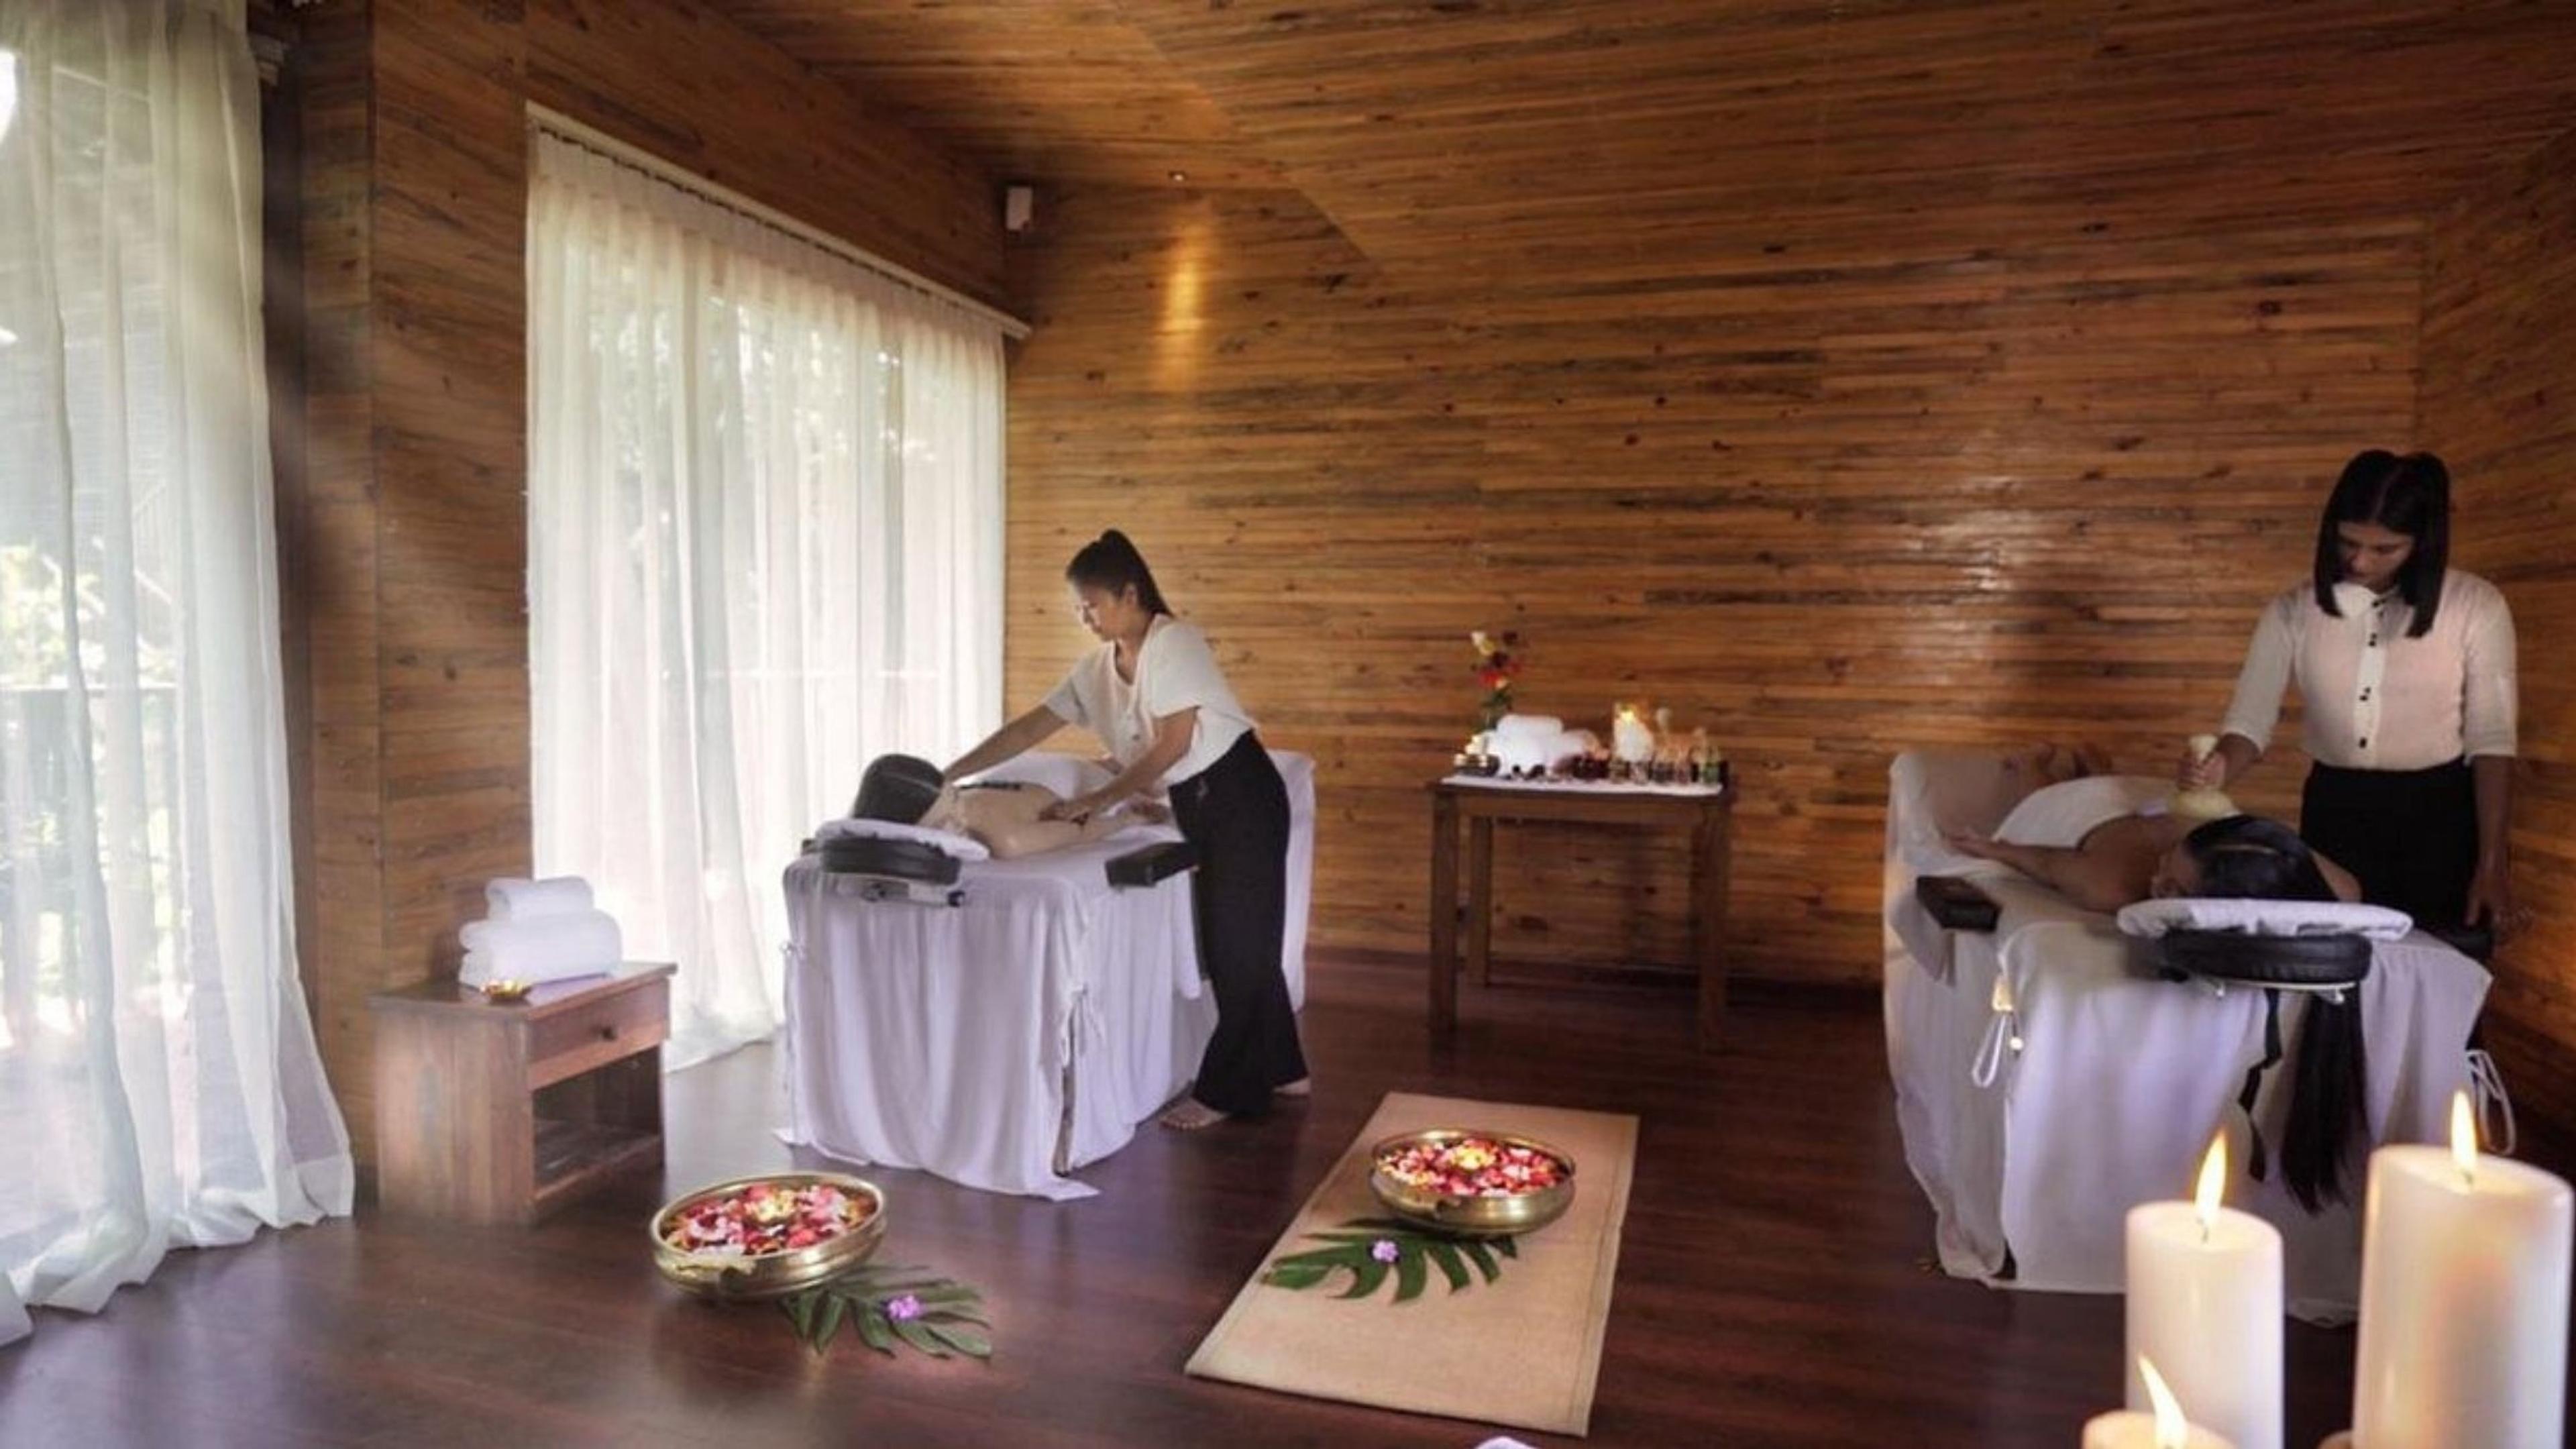 Spa Serenity: For a Relaxing Wellness Retreat